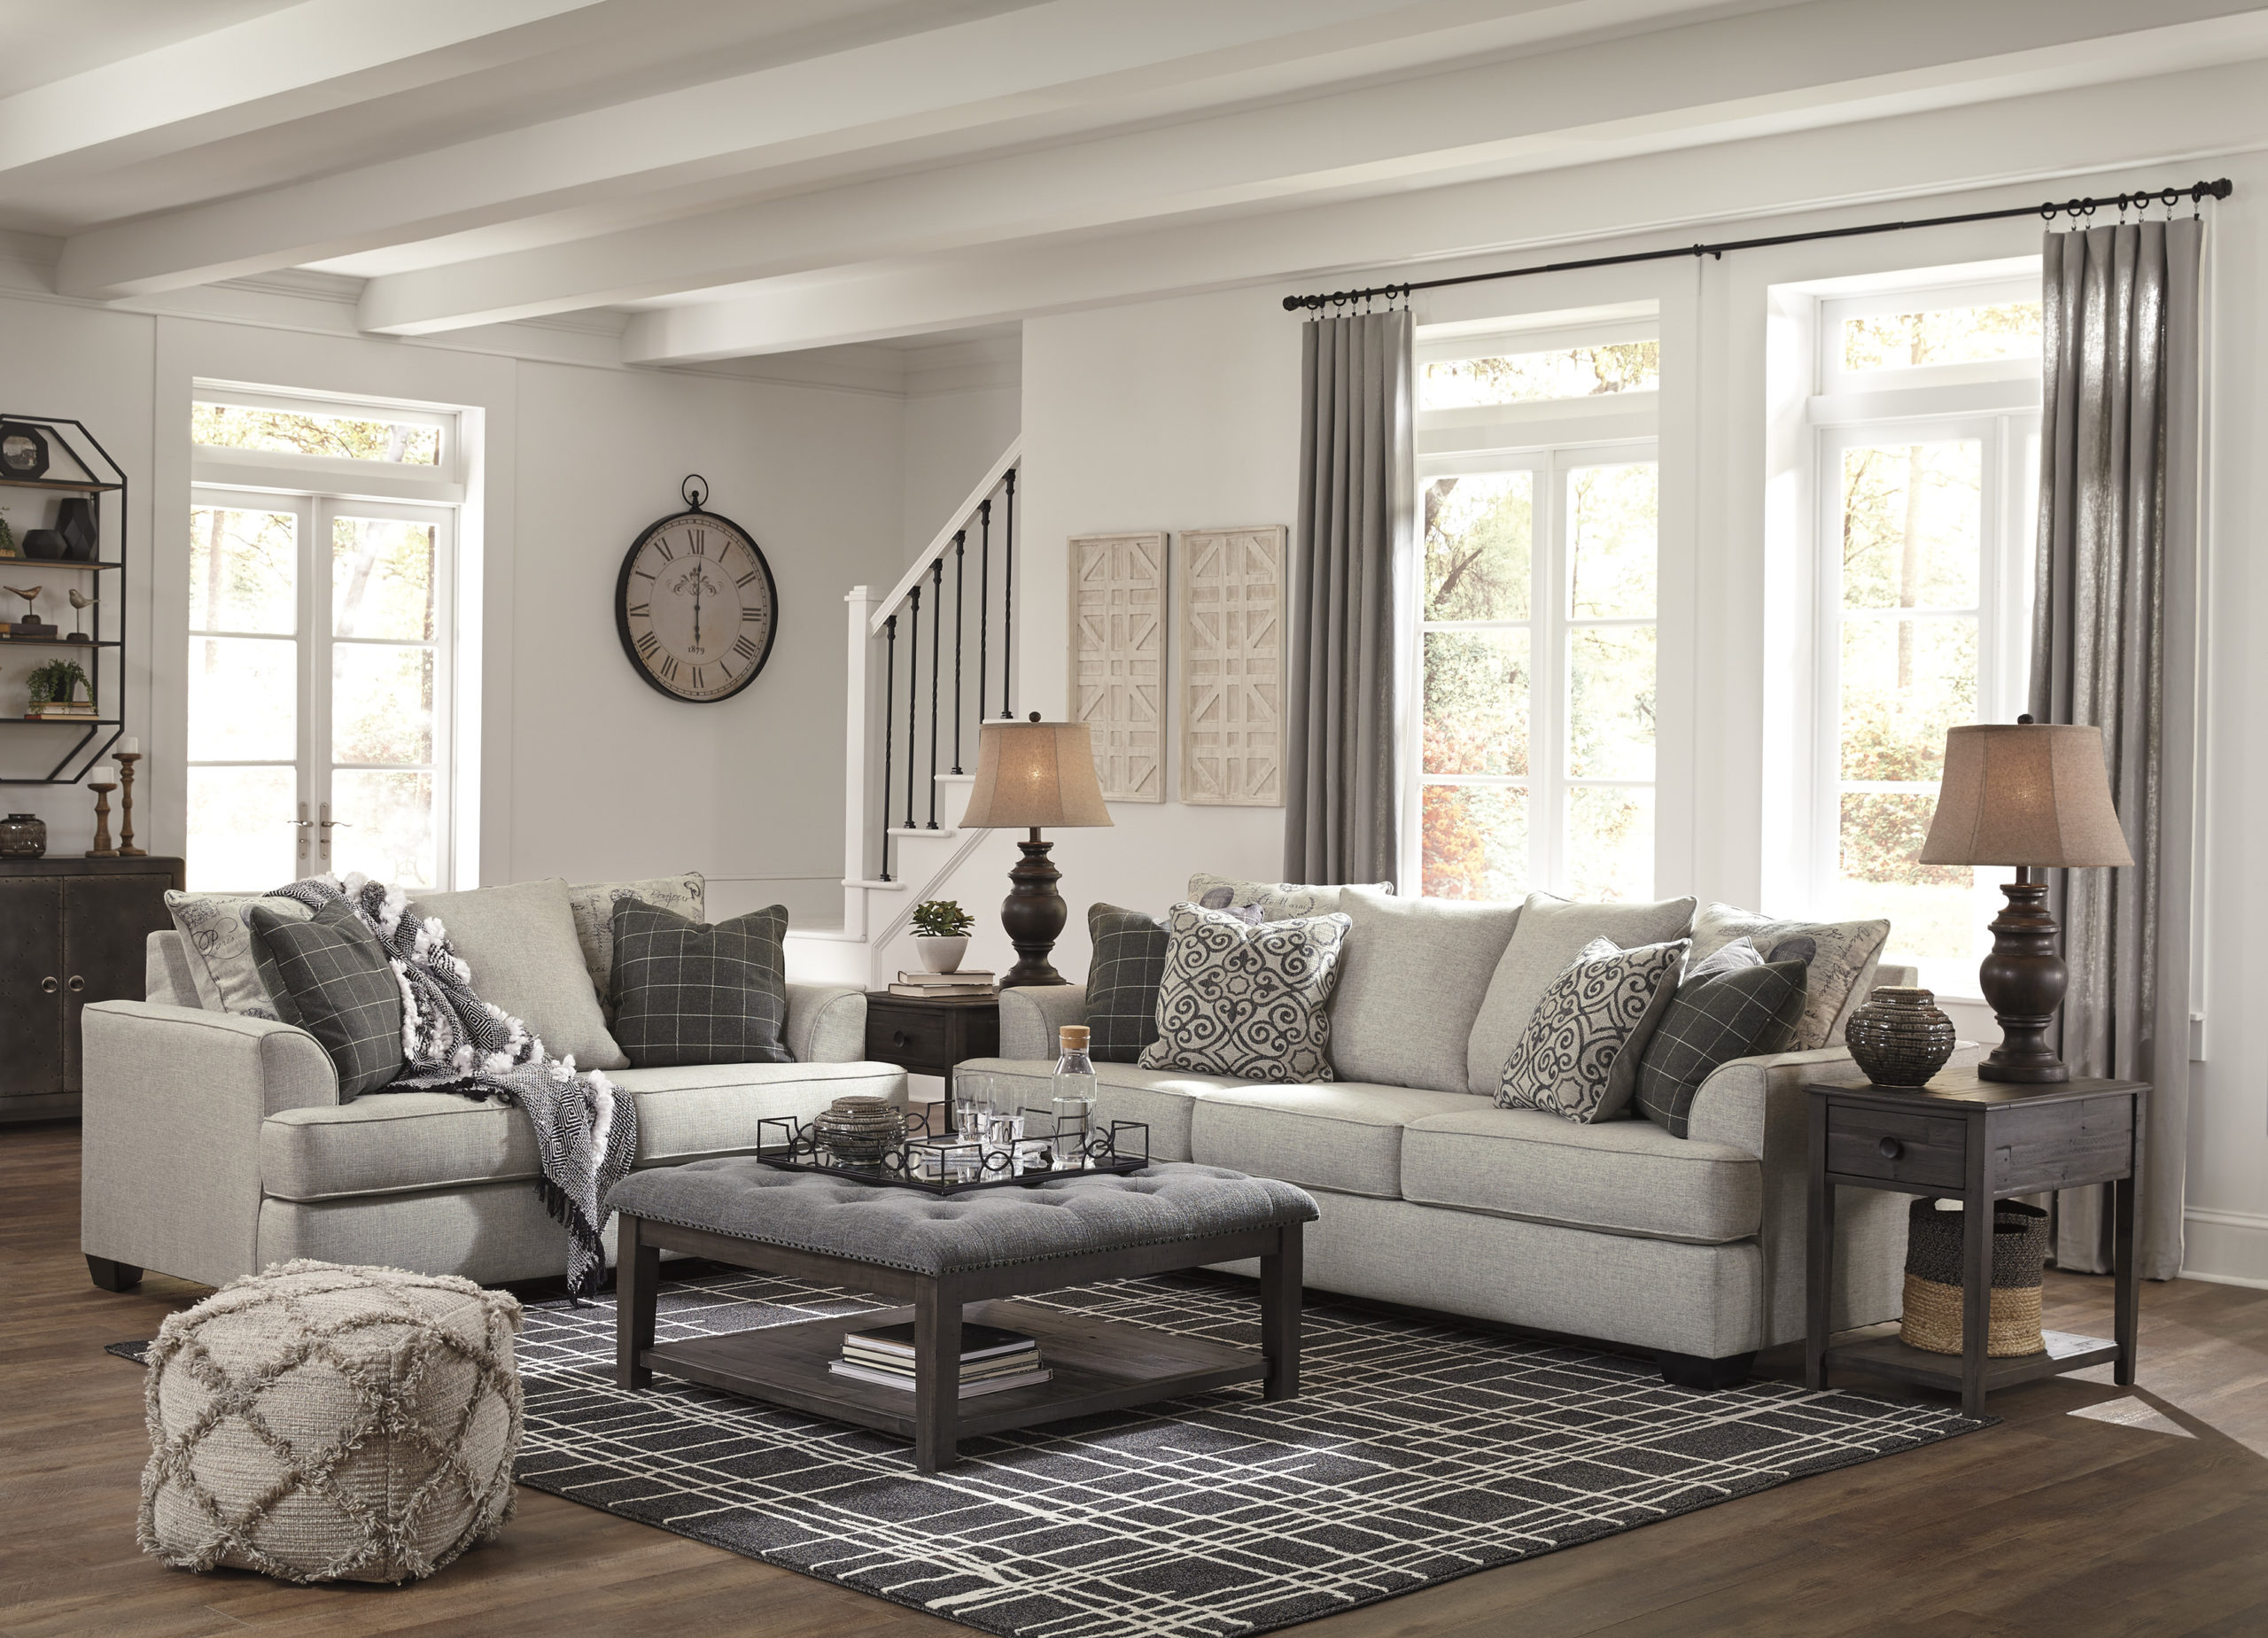 Cool Earth Tones For Living Room